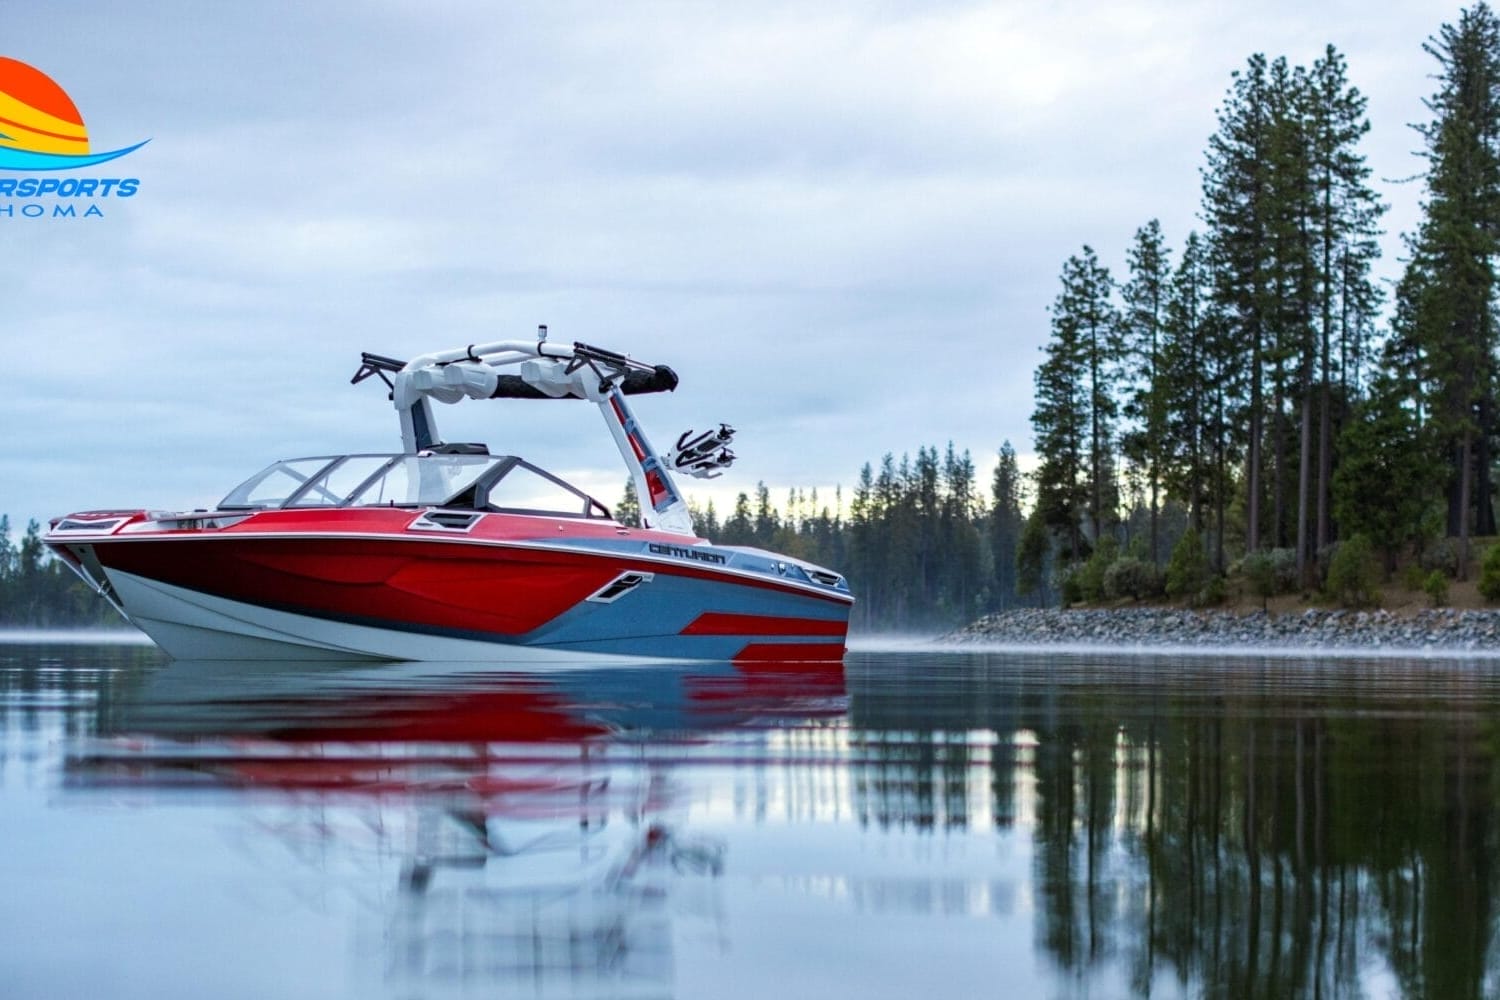 A red and white wakeboard boat is on a calm lake surrounded by trees, with a logo of 